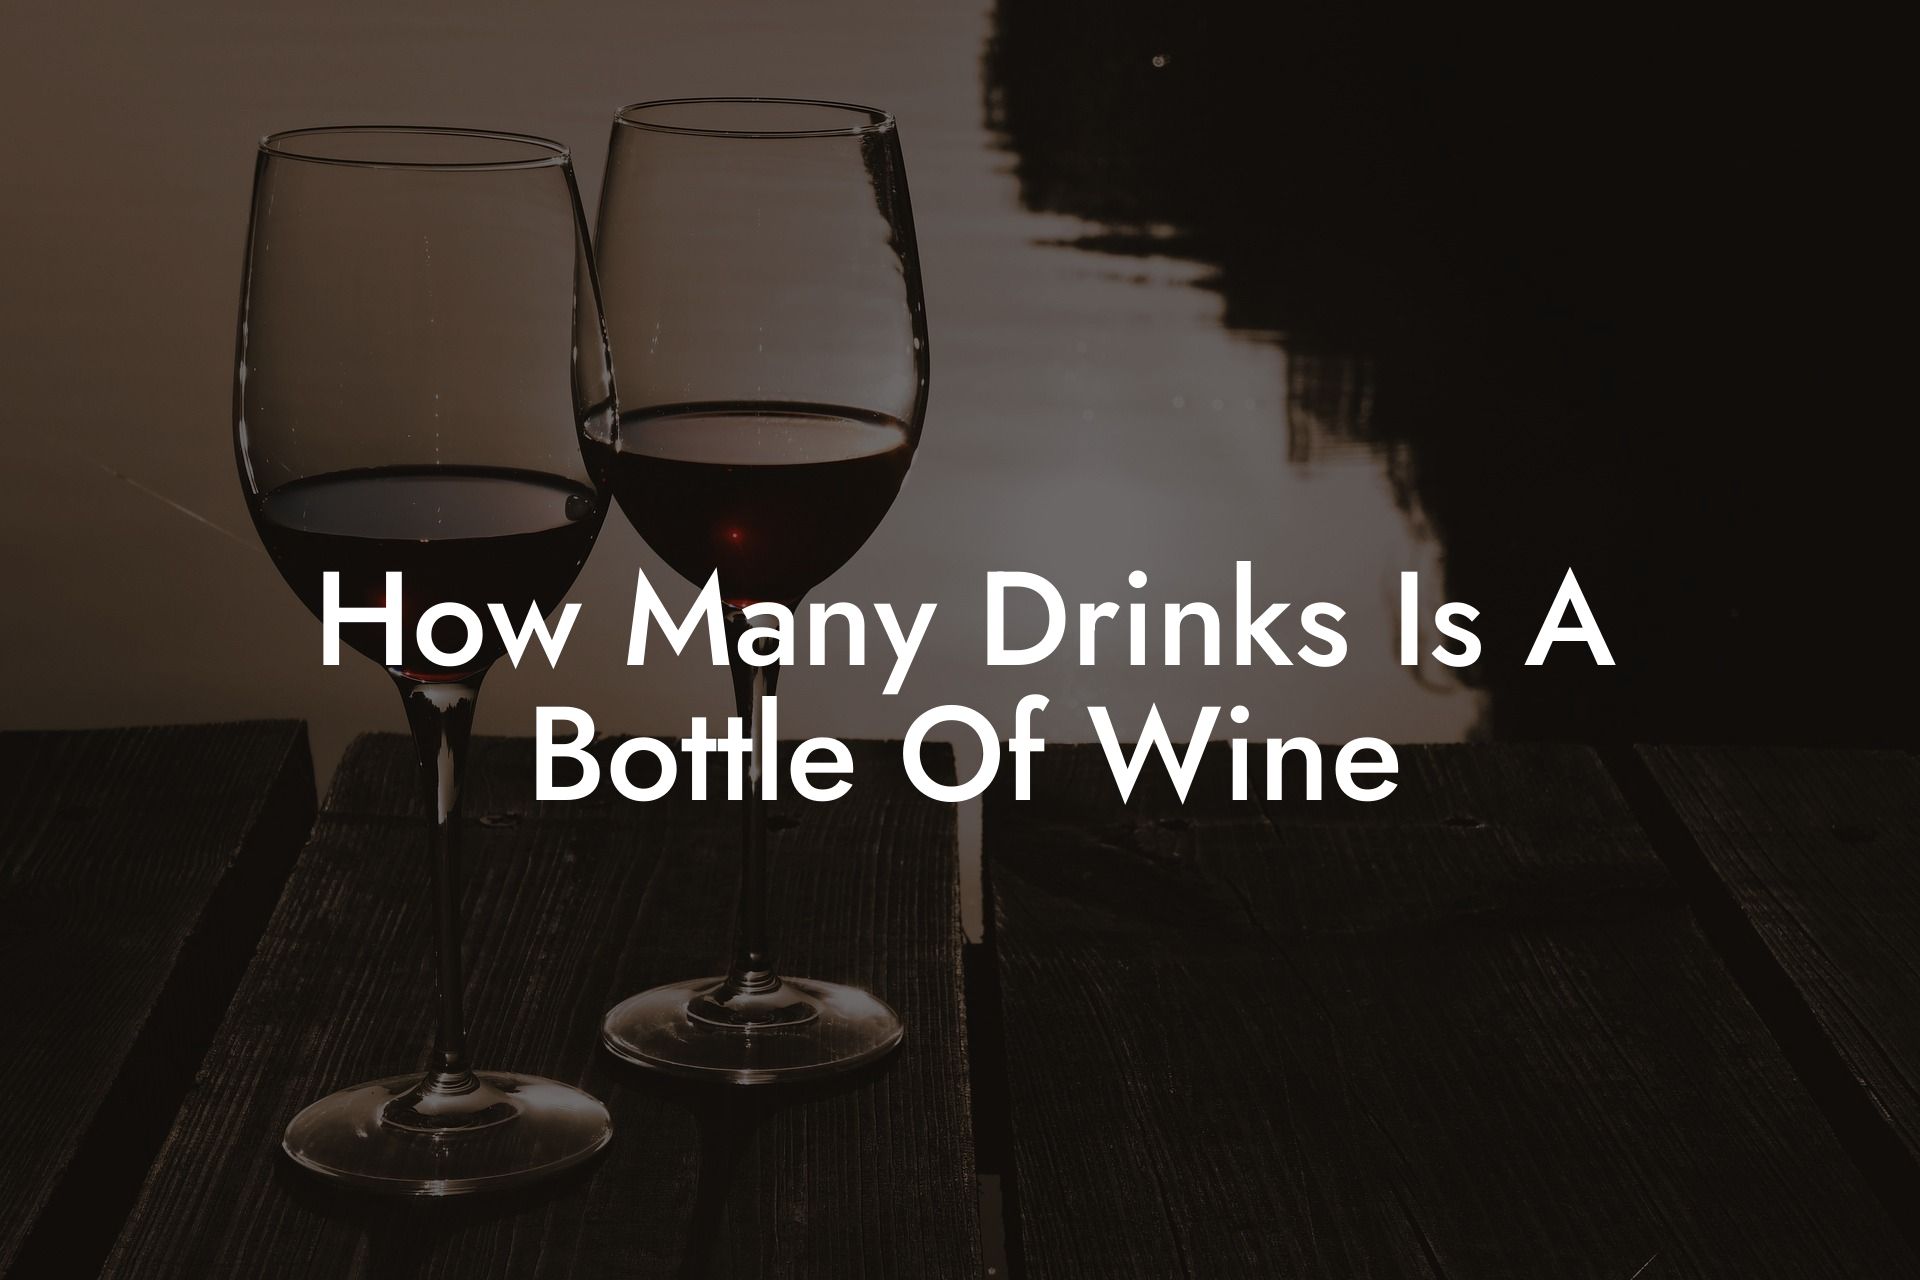 How Many Drinks Is A Bottle Of Wine